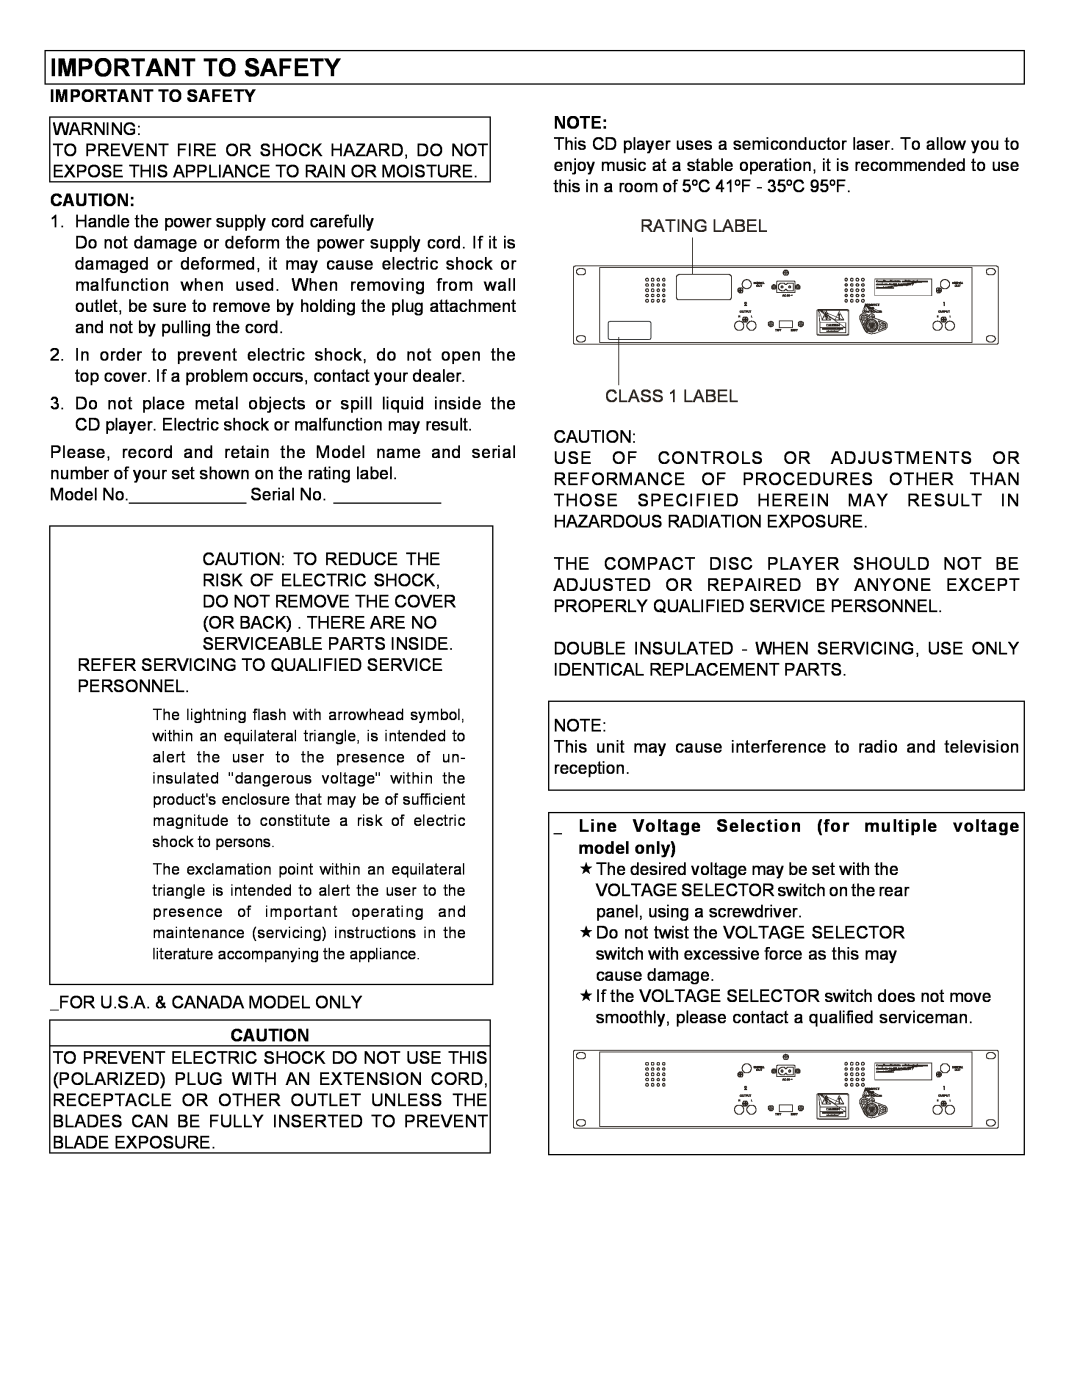 Stanton C-500 user manual Important To Safety, RATING LABEL CLASS 1 LABEL 